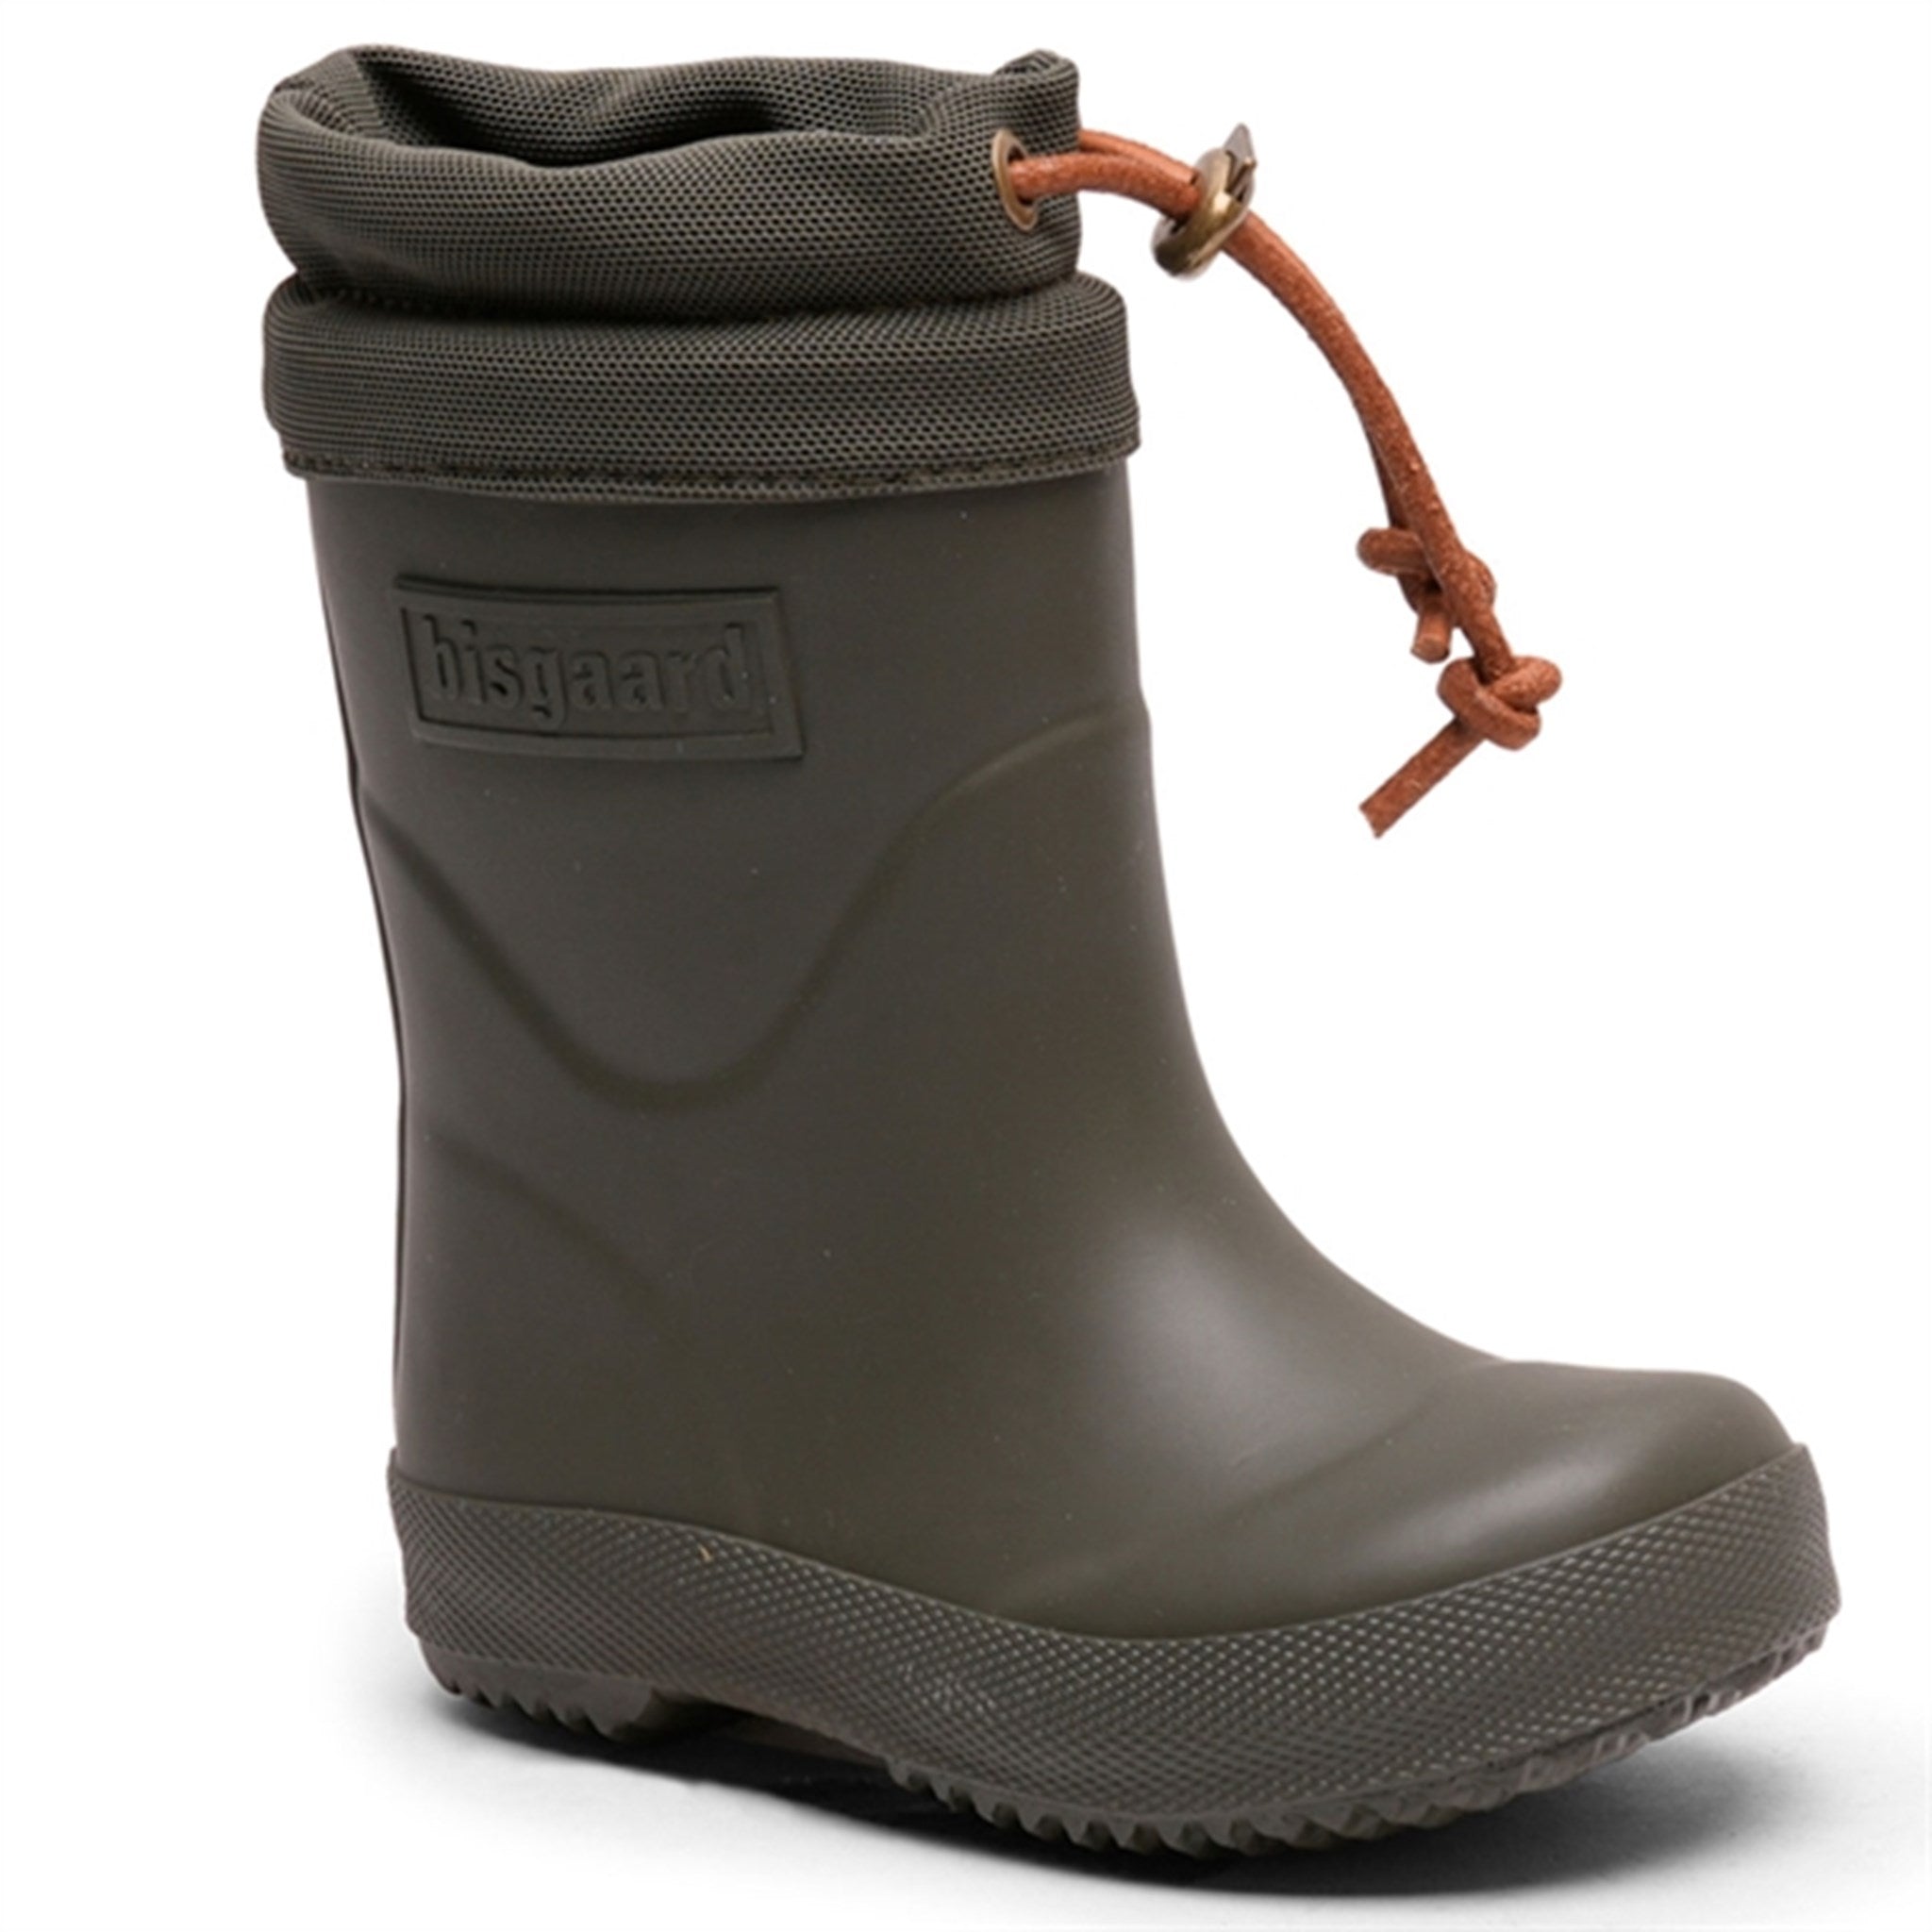 Bisgaard Thermo Boots Olive